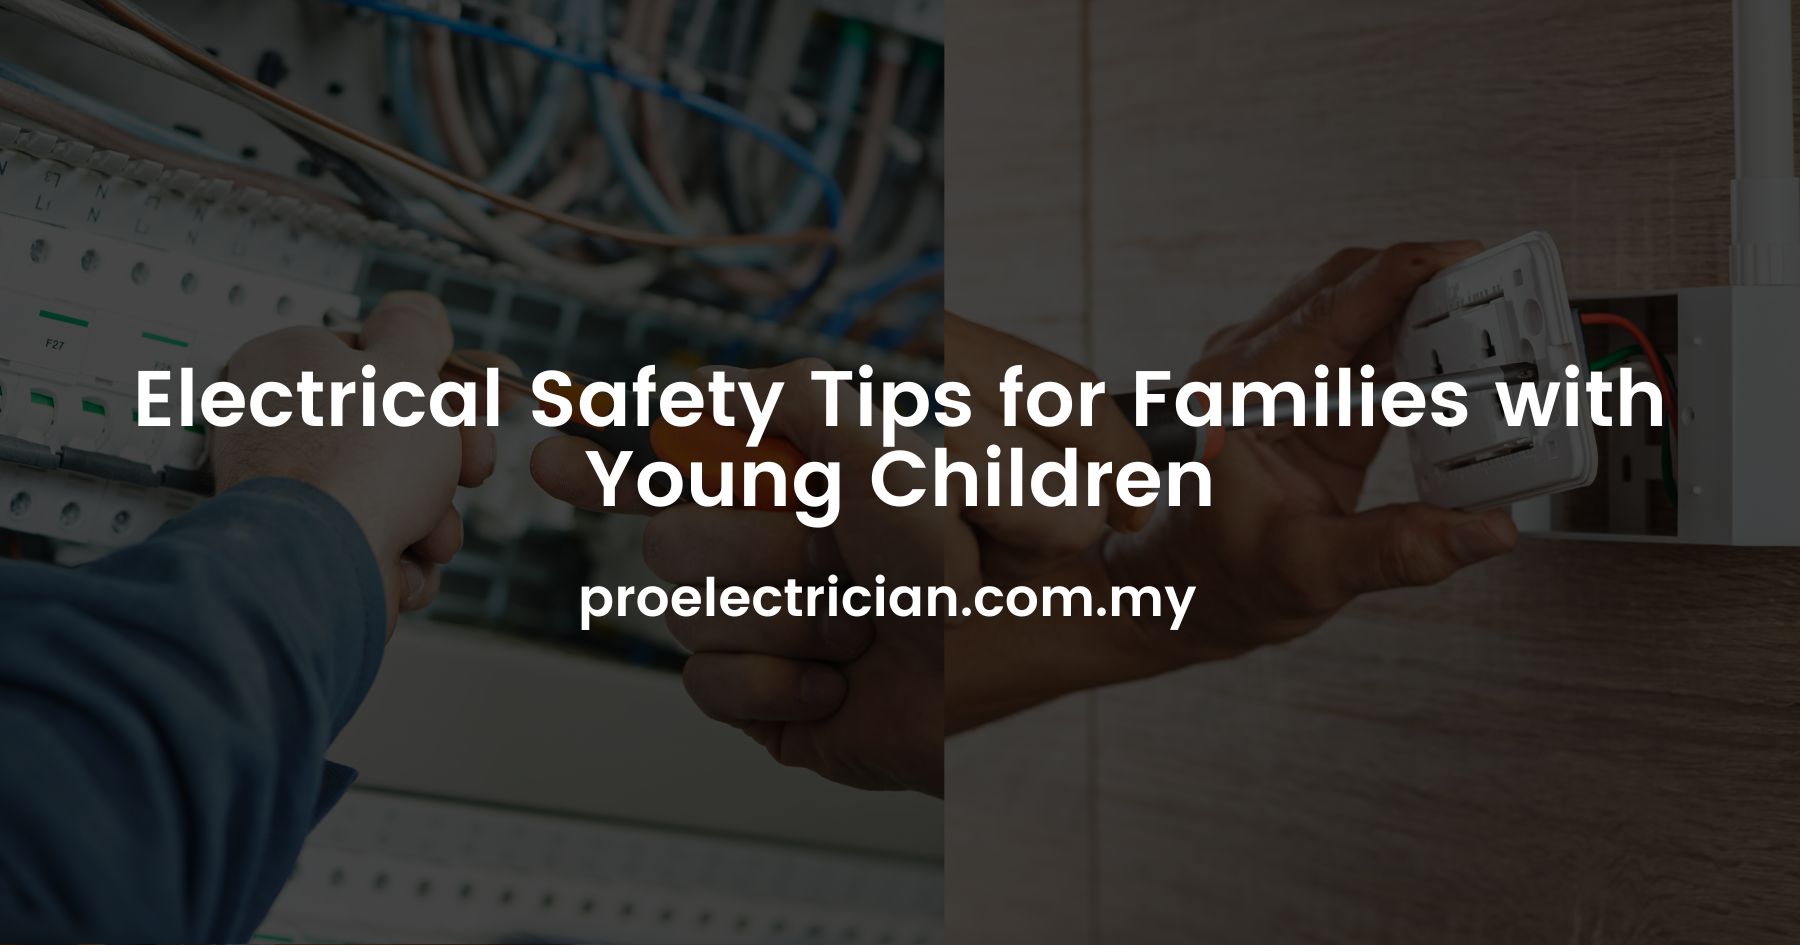 Electrical Safety Tips for Families with Young Children